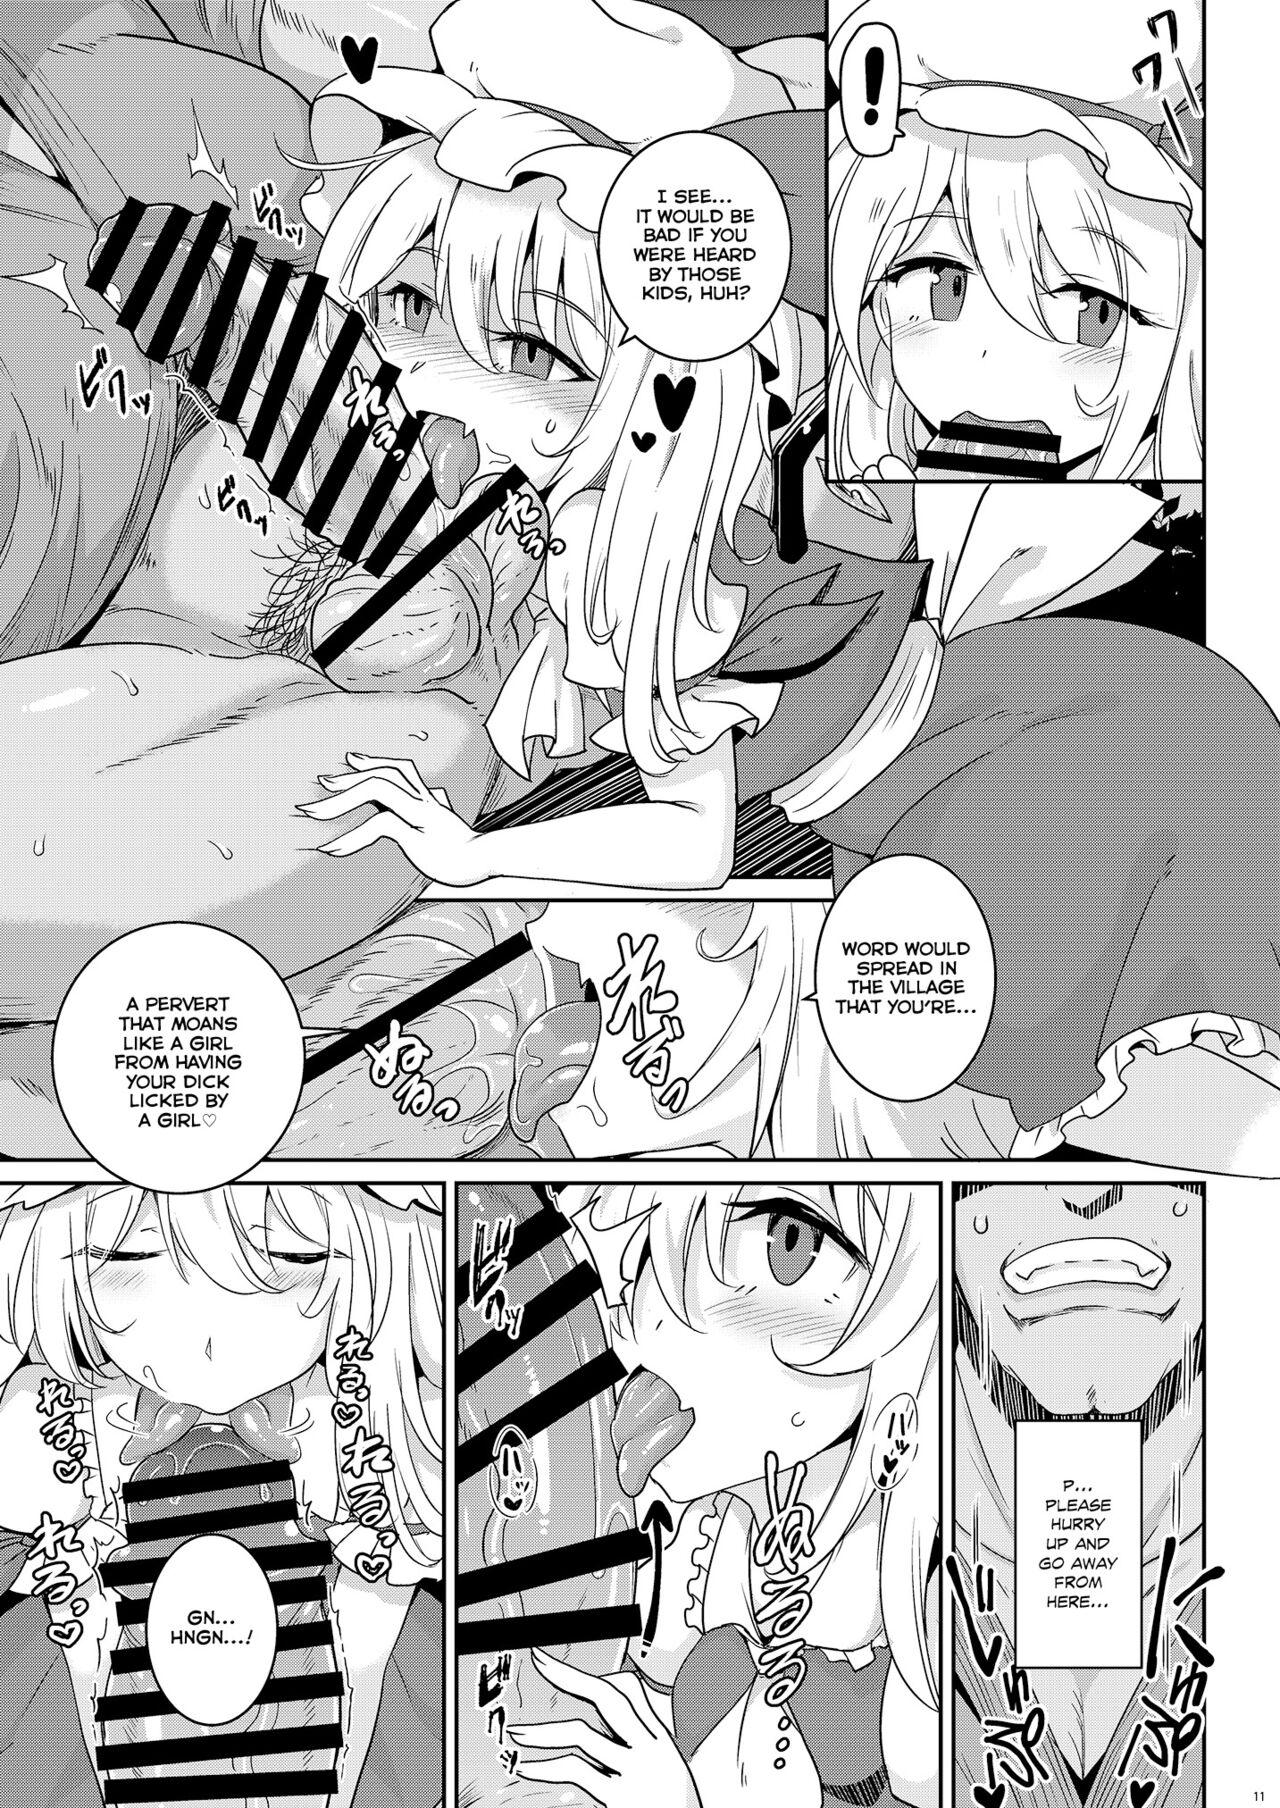 Real Amateurs MSGKWR2 - Touhou project Pussy Licking - Page 10